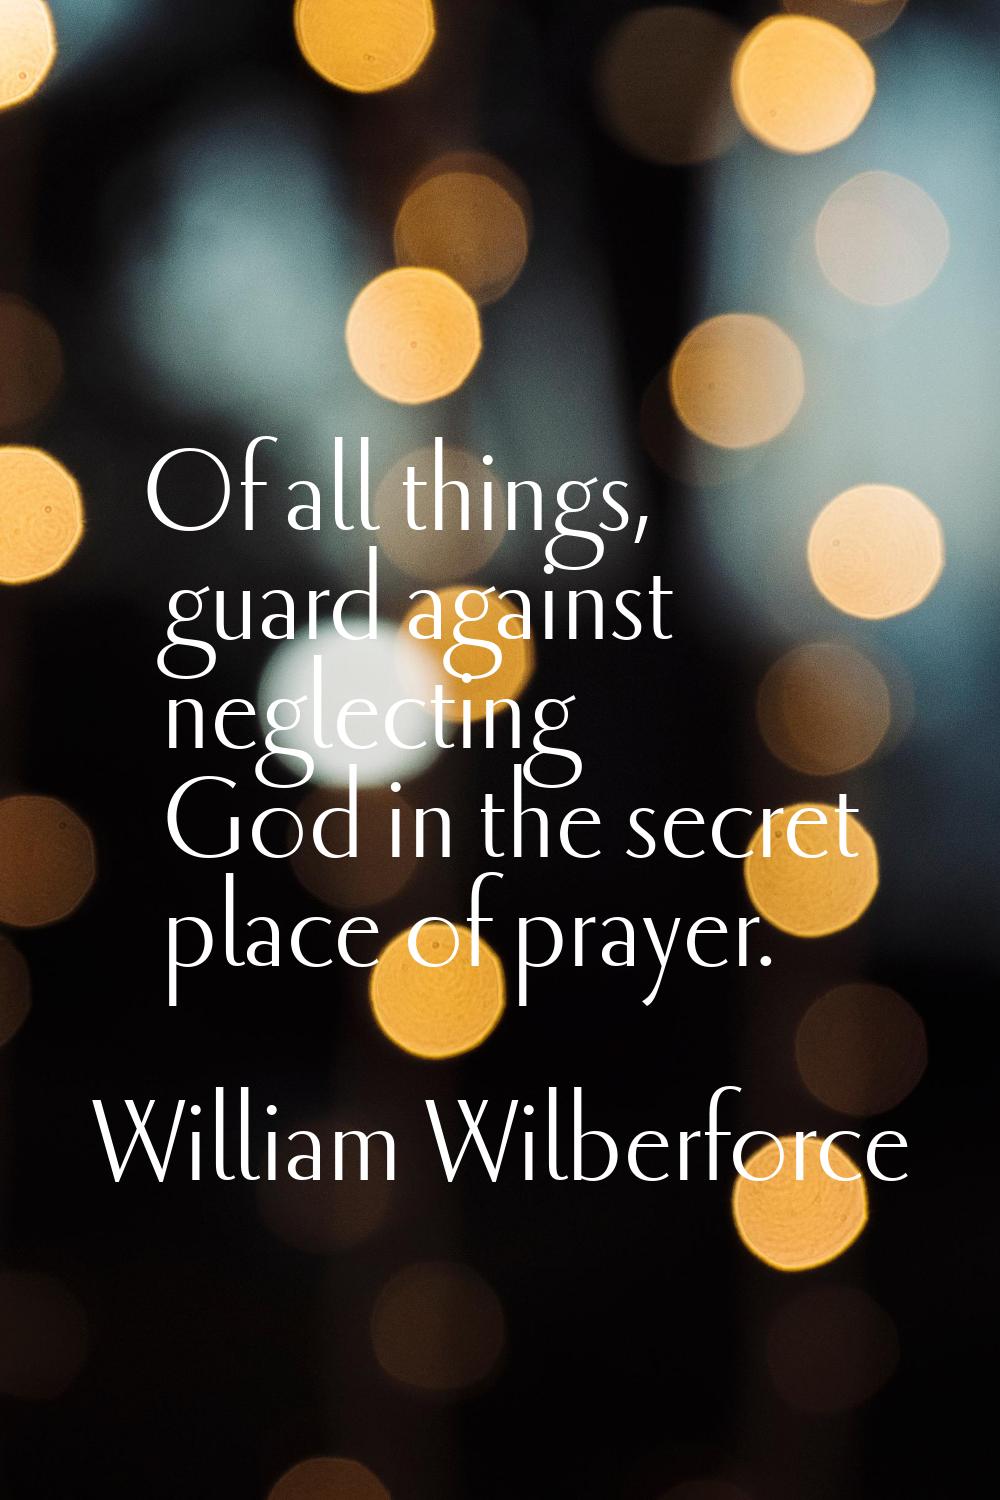 Of all things, guard against neglecting God in the secret place of prayer.